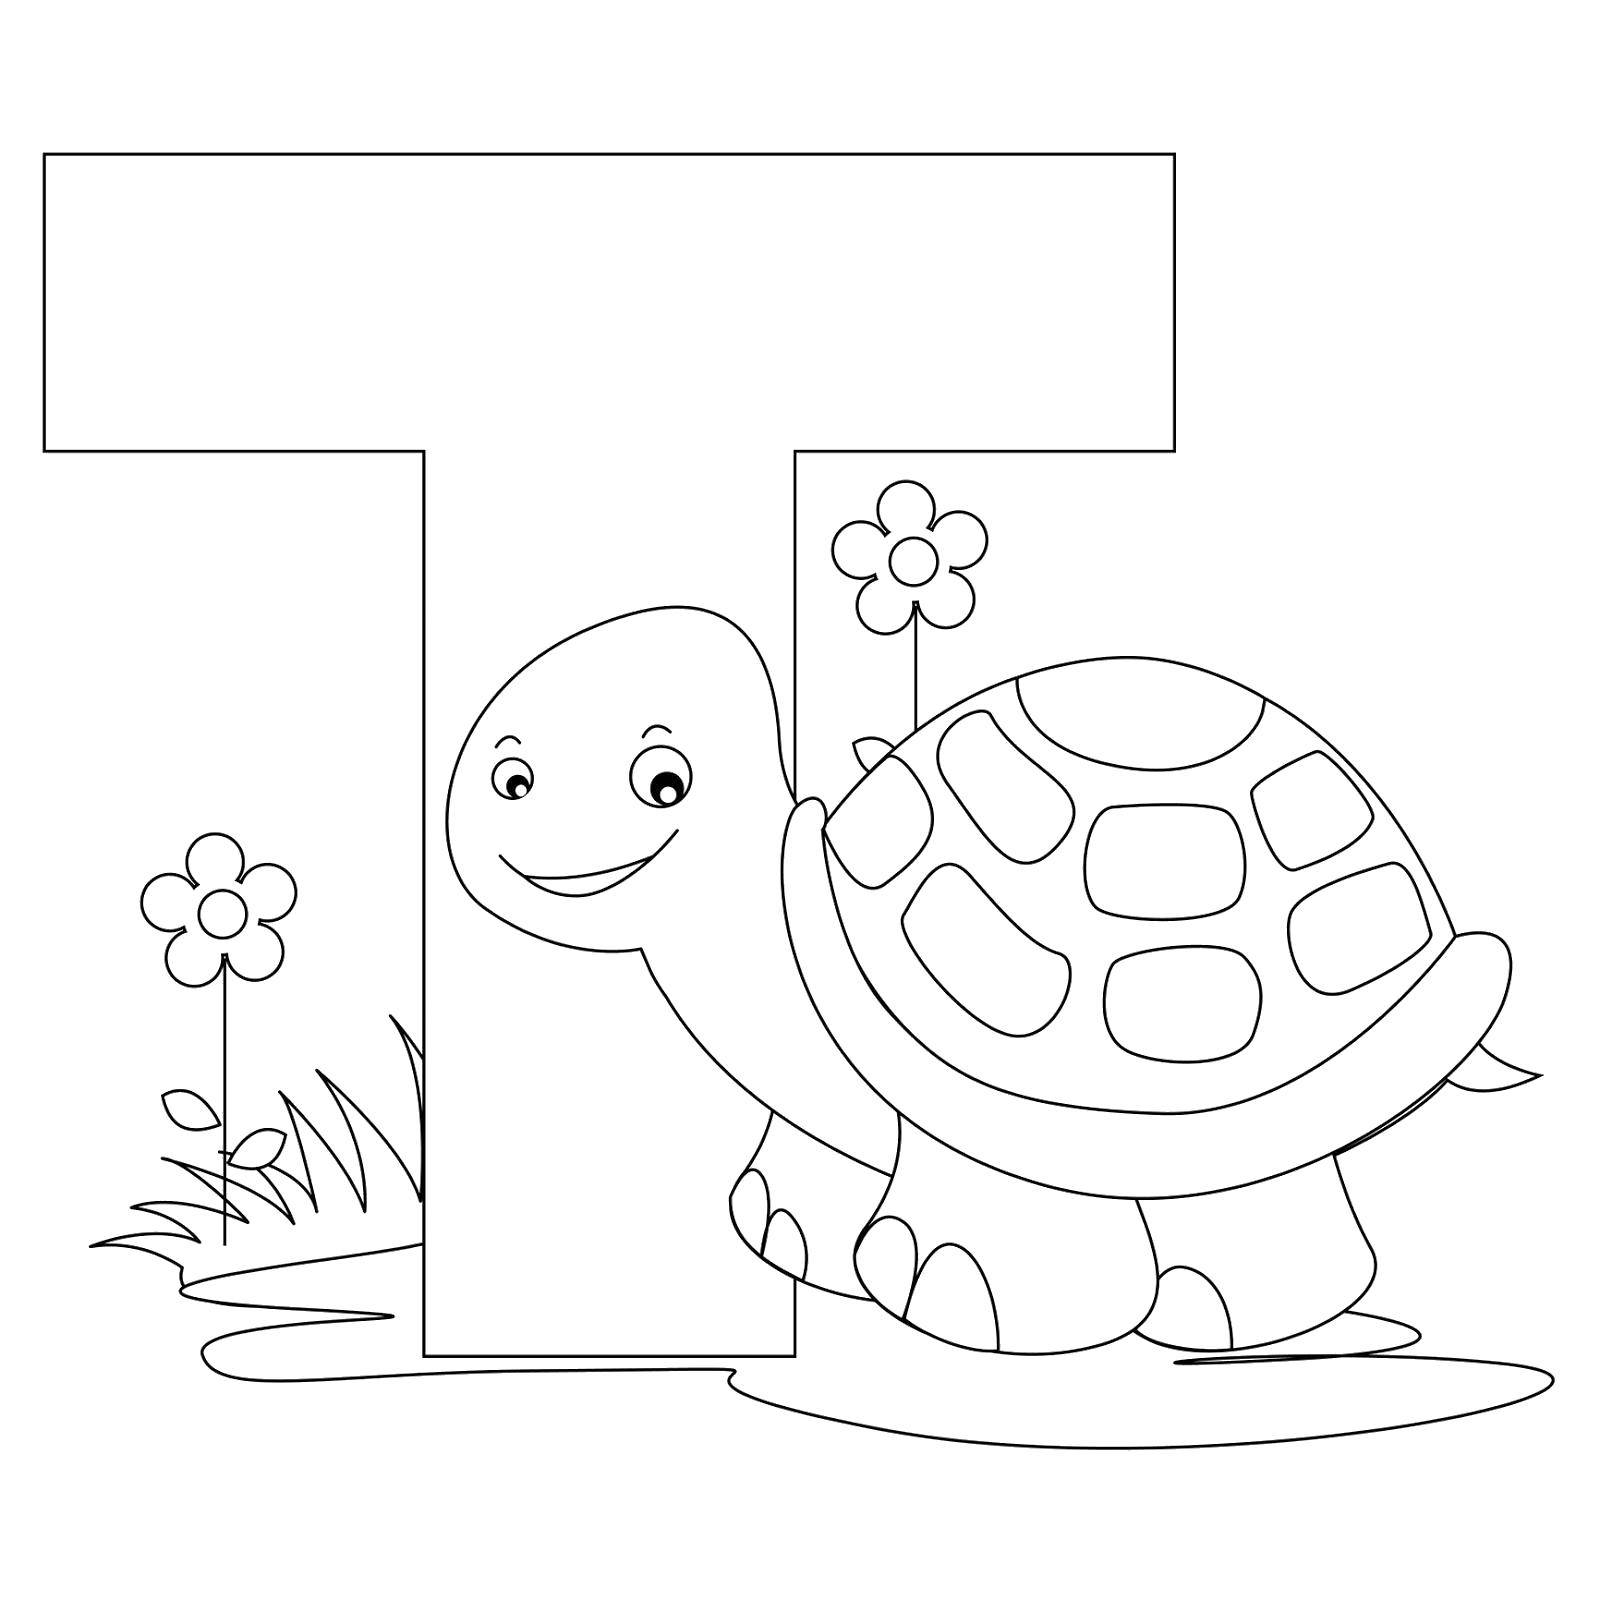 Coloring Turtle h. Category English alphabet. Tags:  The alphabet, letters, words.